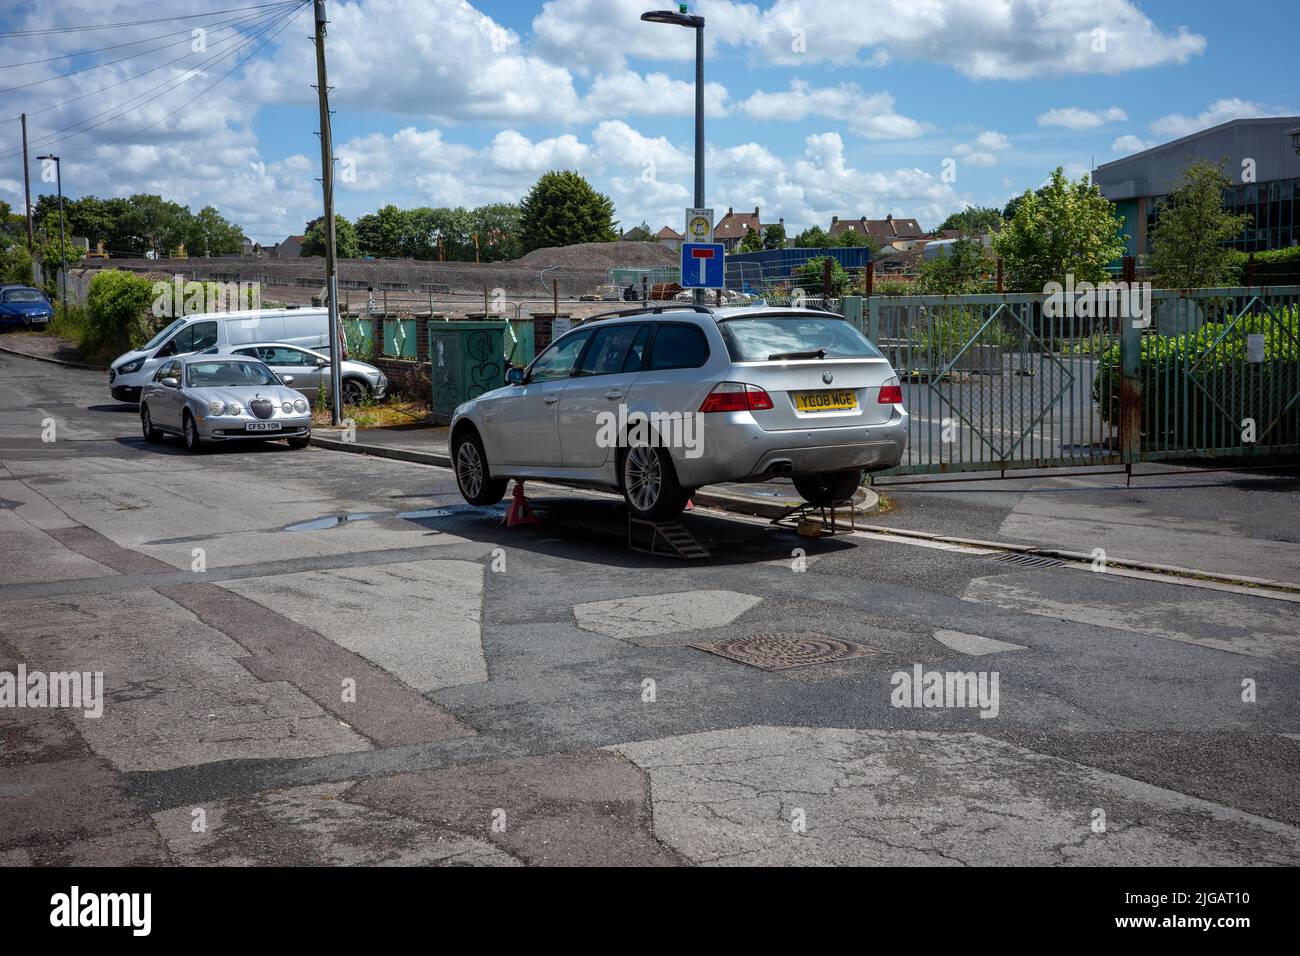 Car abandoned axal stands on the road(Jul22) Stock Photo